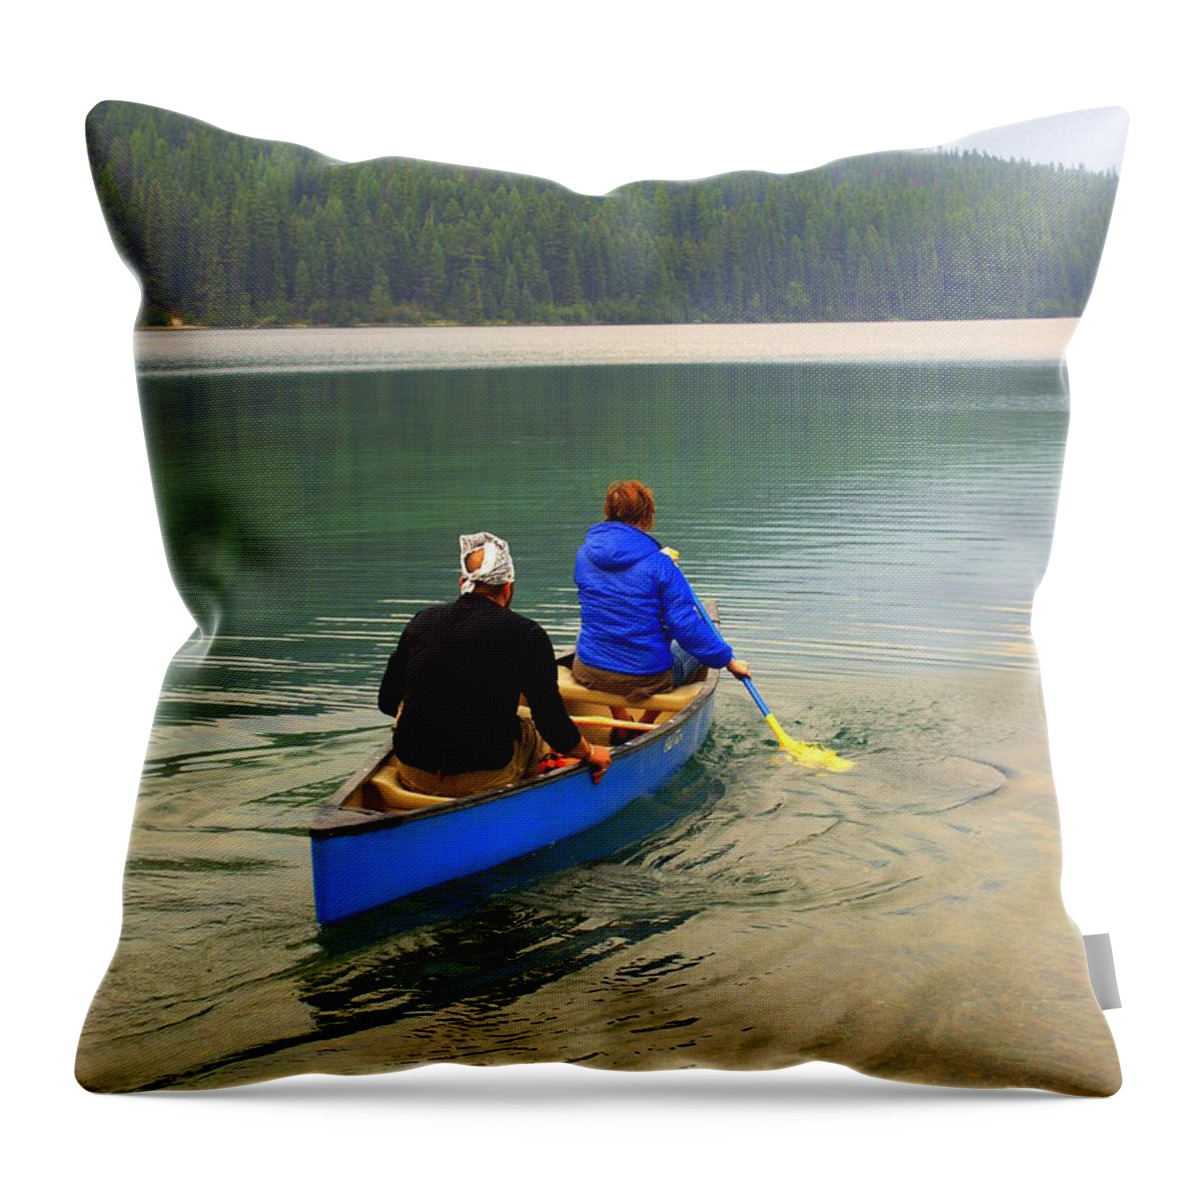 Glacier National Park Throw Pillow featuring the photograph Canoeing Glacier Park by Marty Koch